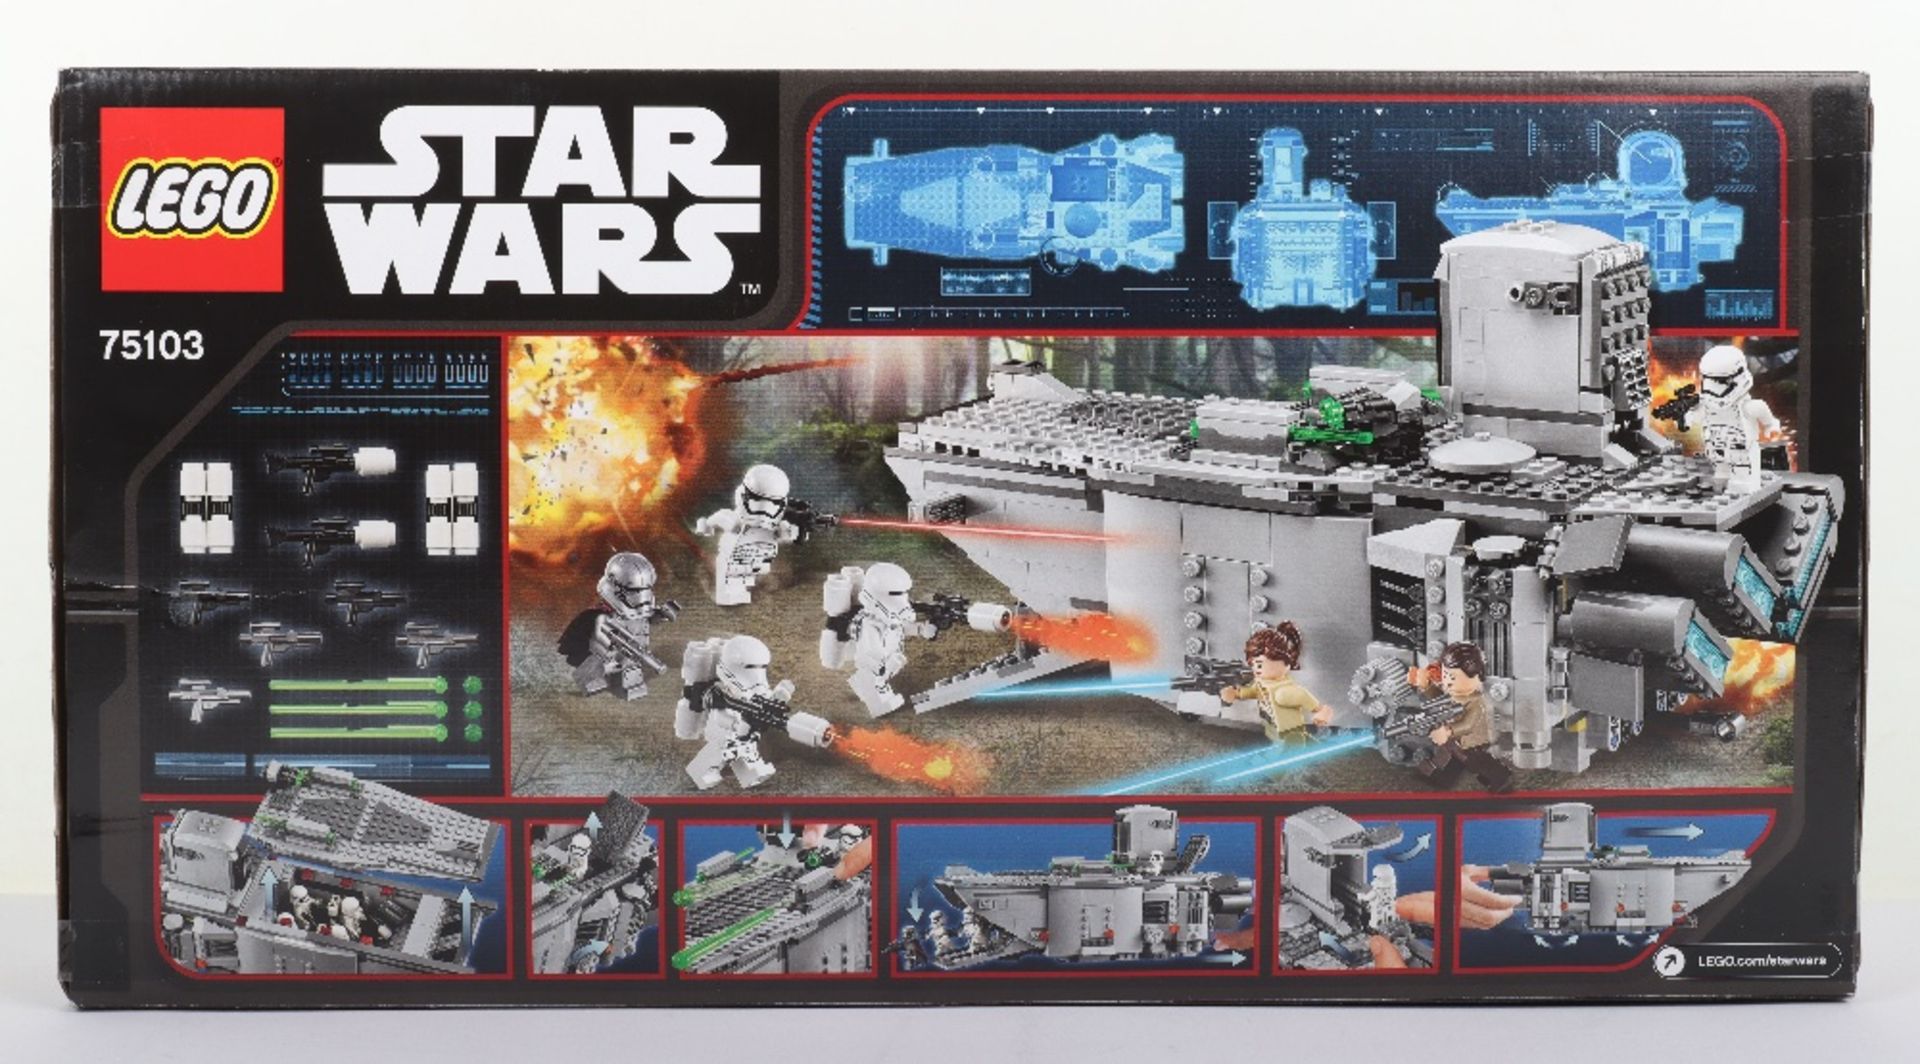 Lego Star Wars 75103 and 5002948 sealed boxed sets - Image 5 of 11